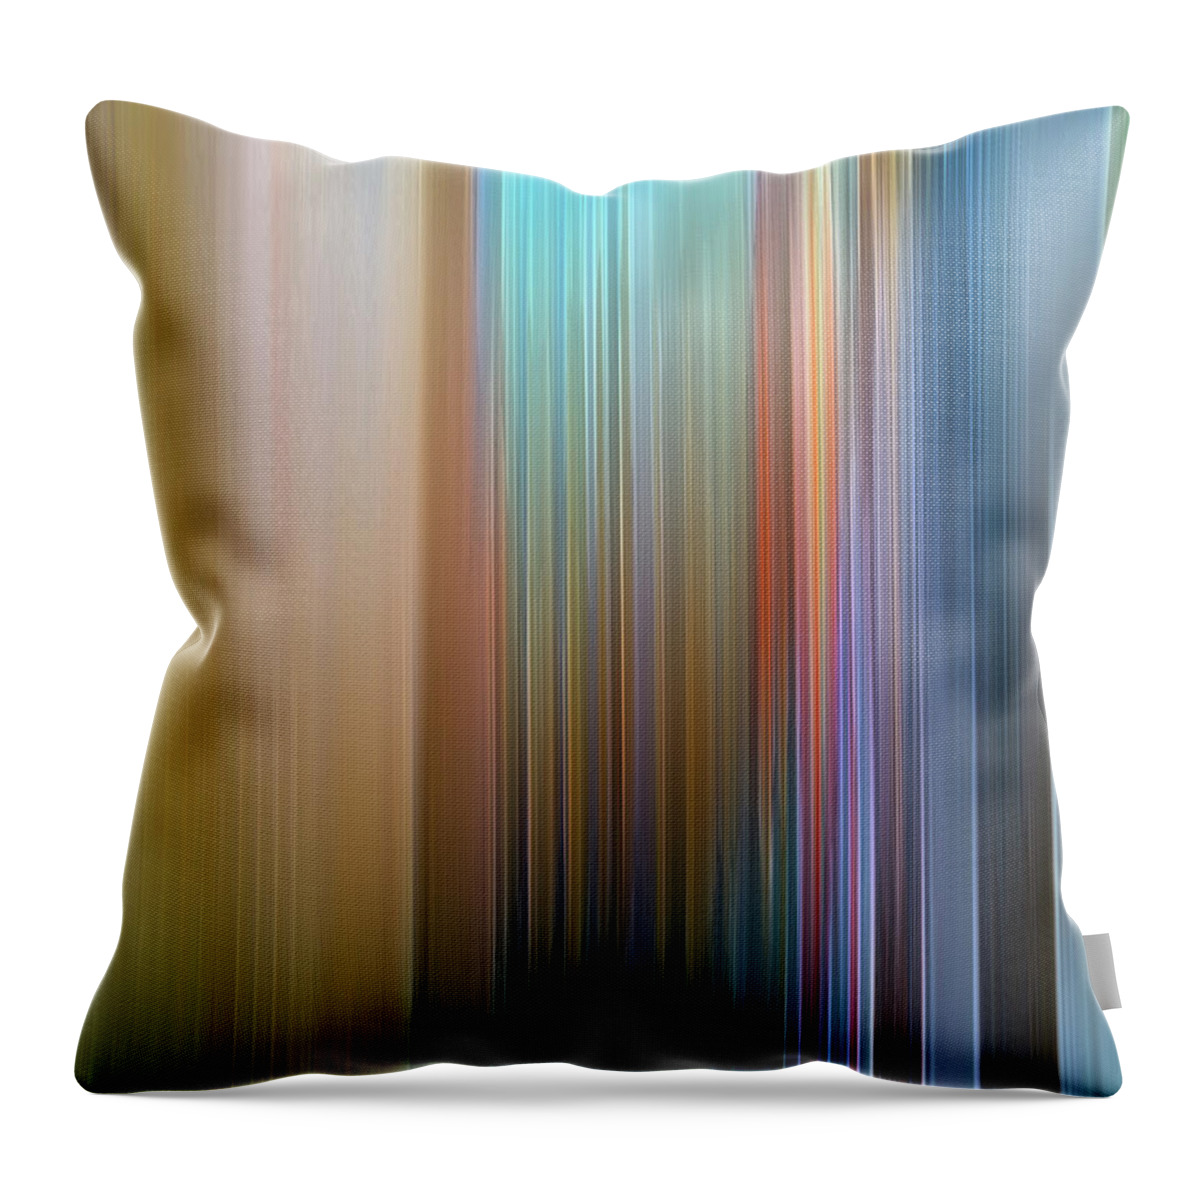 Abstract Throw Pillow featuring the digital art Stria Mediterranean by Gina Harrison